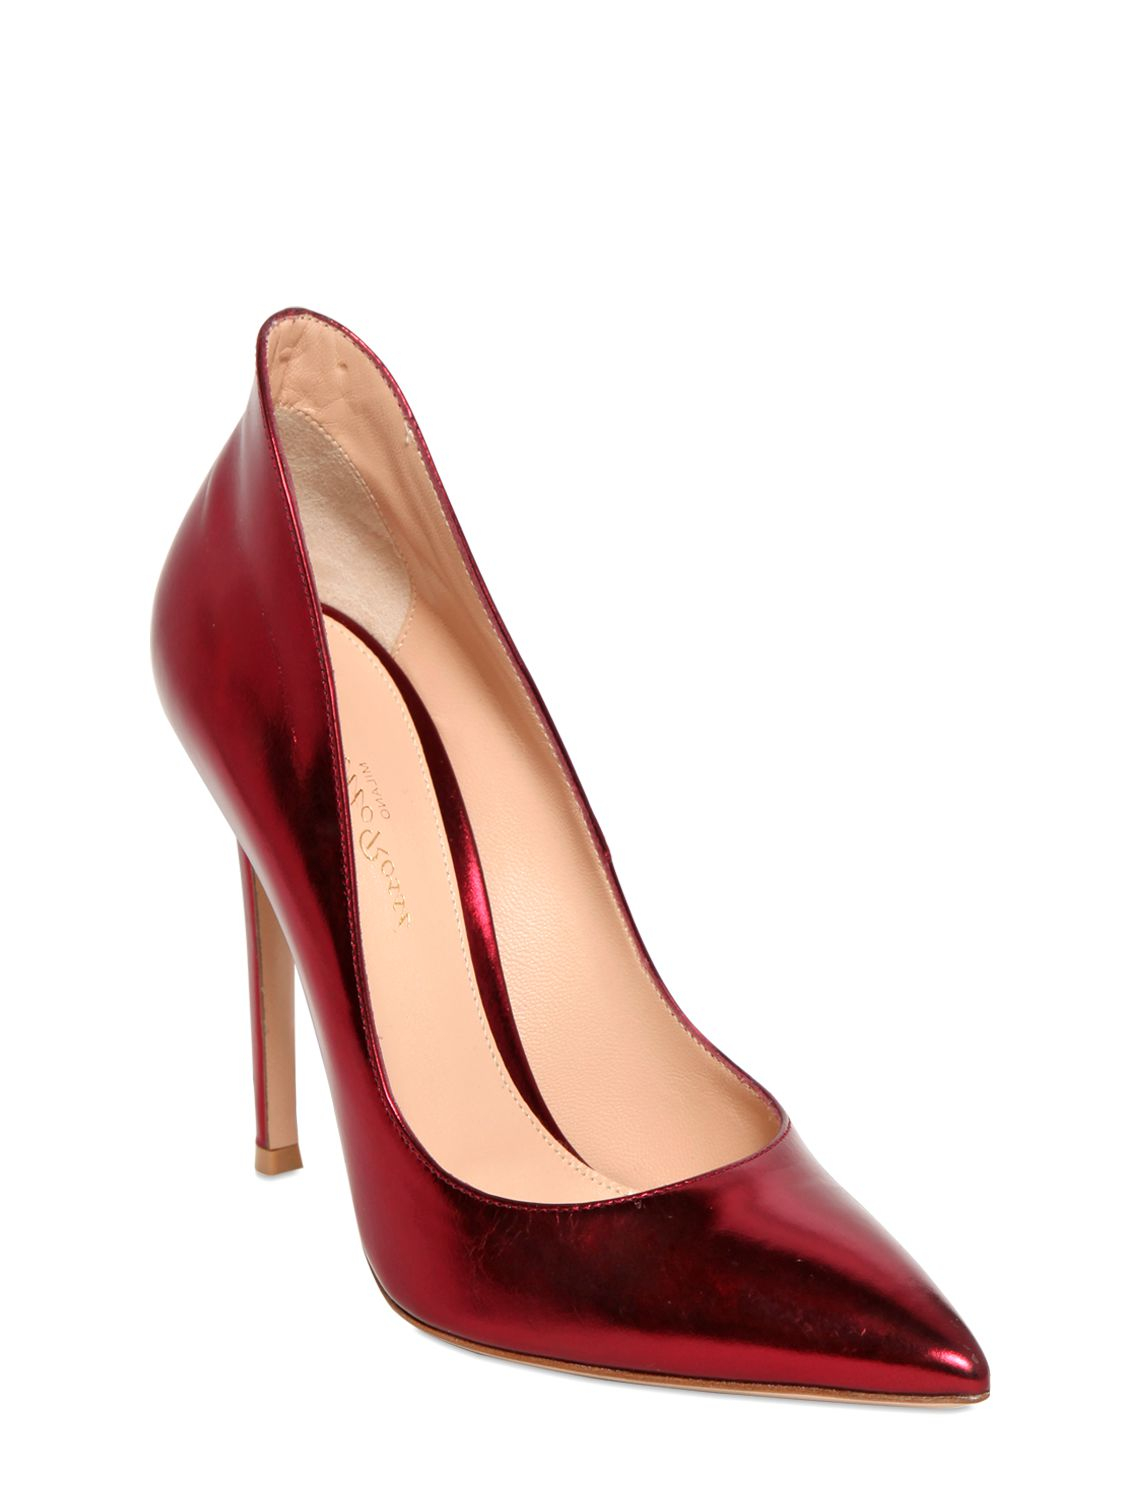 Gianvito Rossi 100mm Metallic Leather Pumps in Red - Lyst